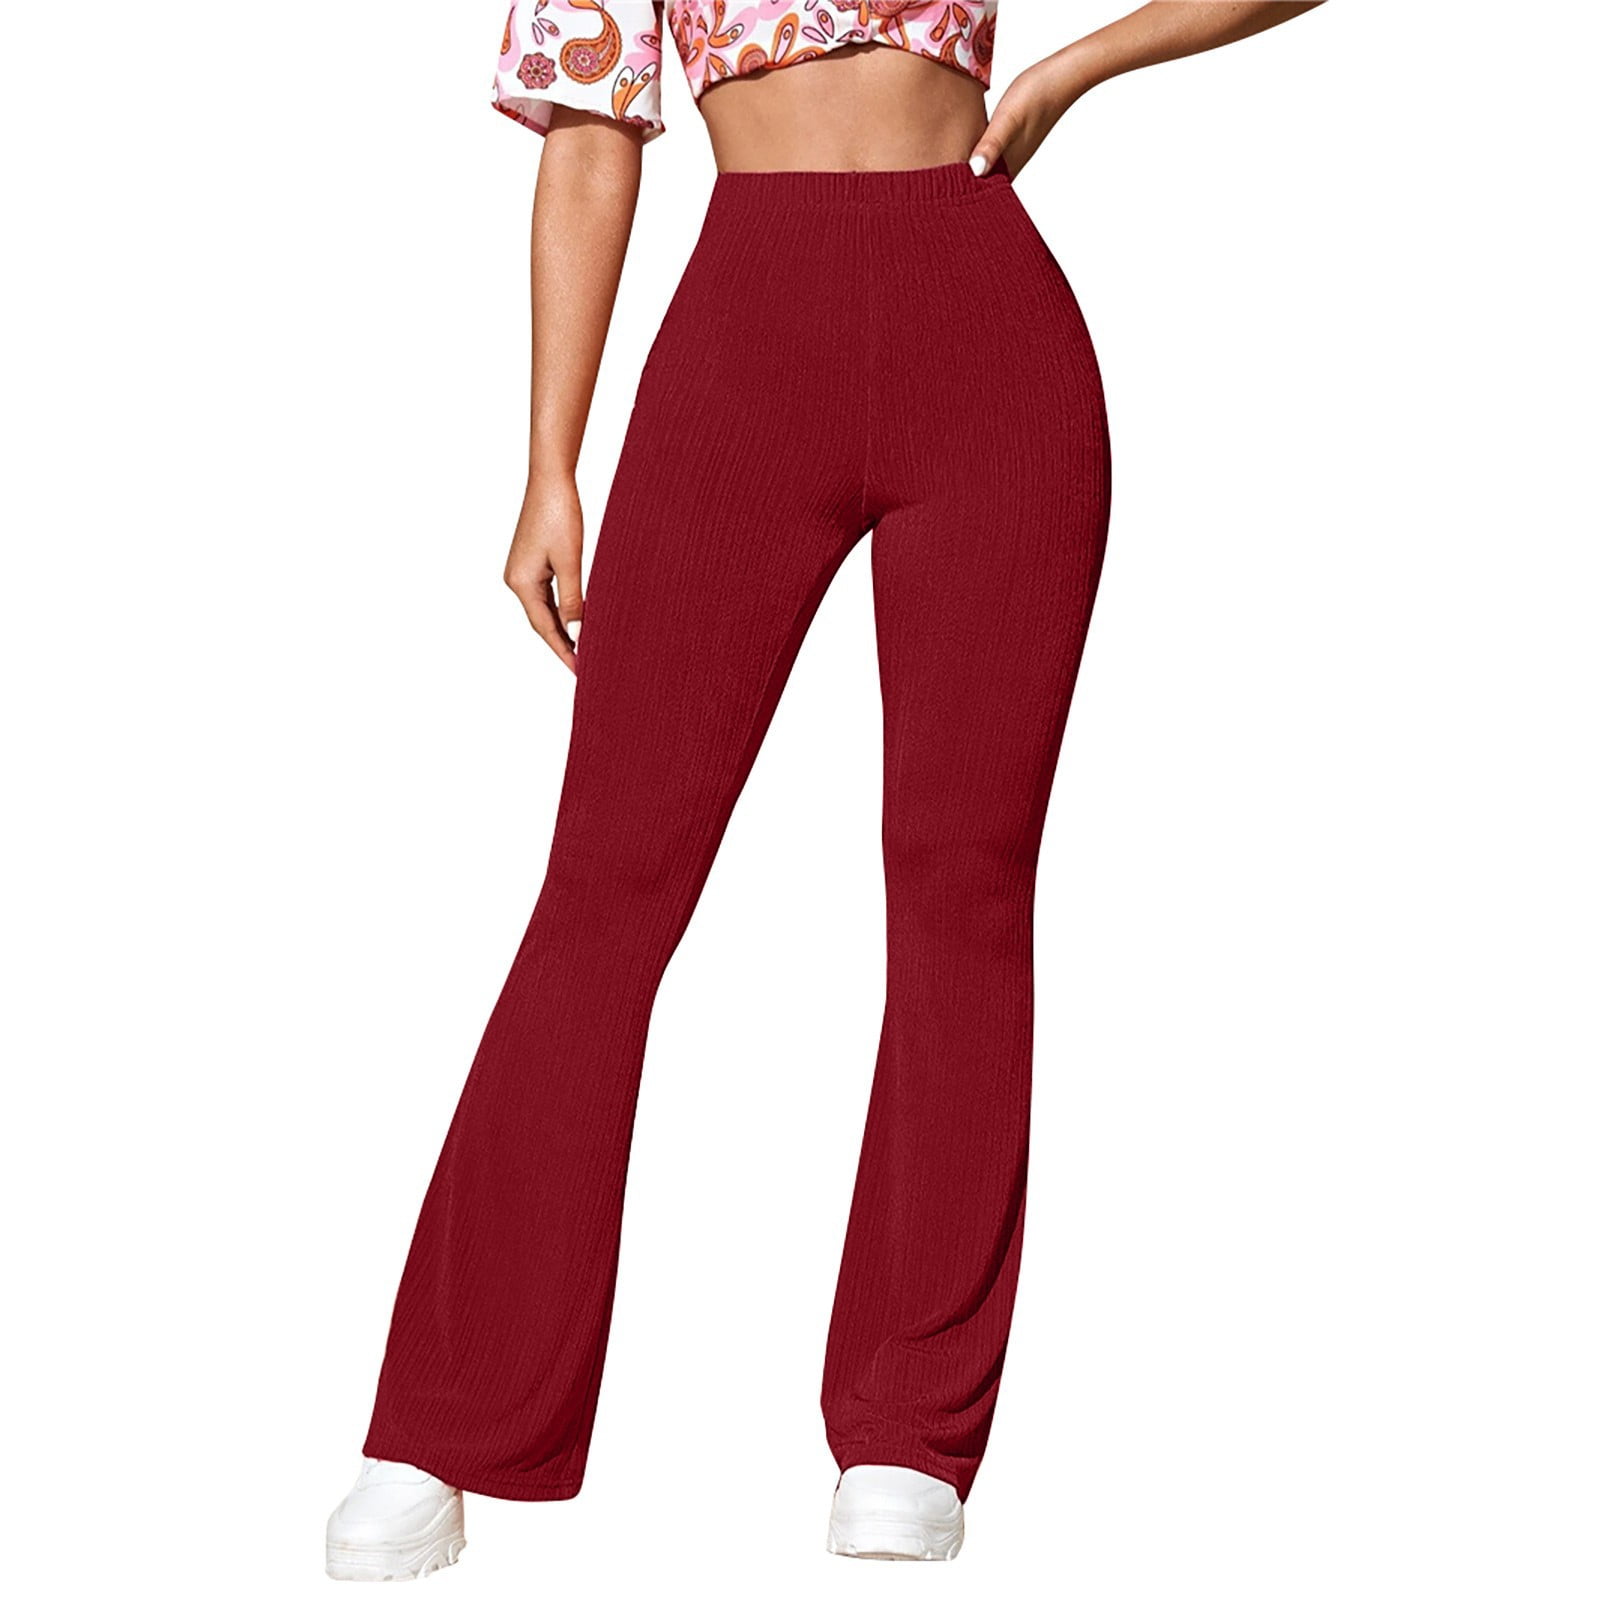 RQYYD Womens Flare Bootcut Yoga Pants Elastic Hight Waisted Tummy Control  Workout Bell Bottom Leggings Athletic Wide Leg Pants(Red,XL)